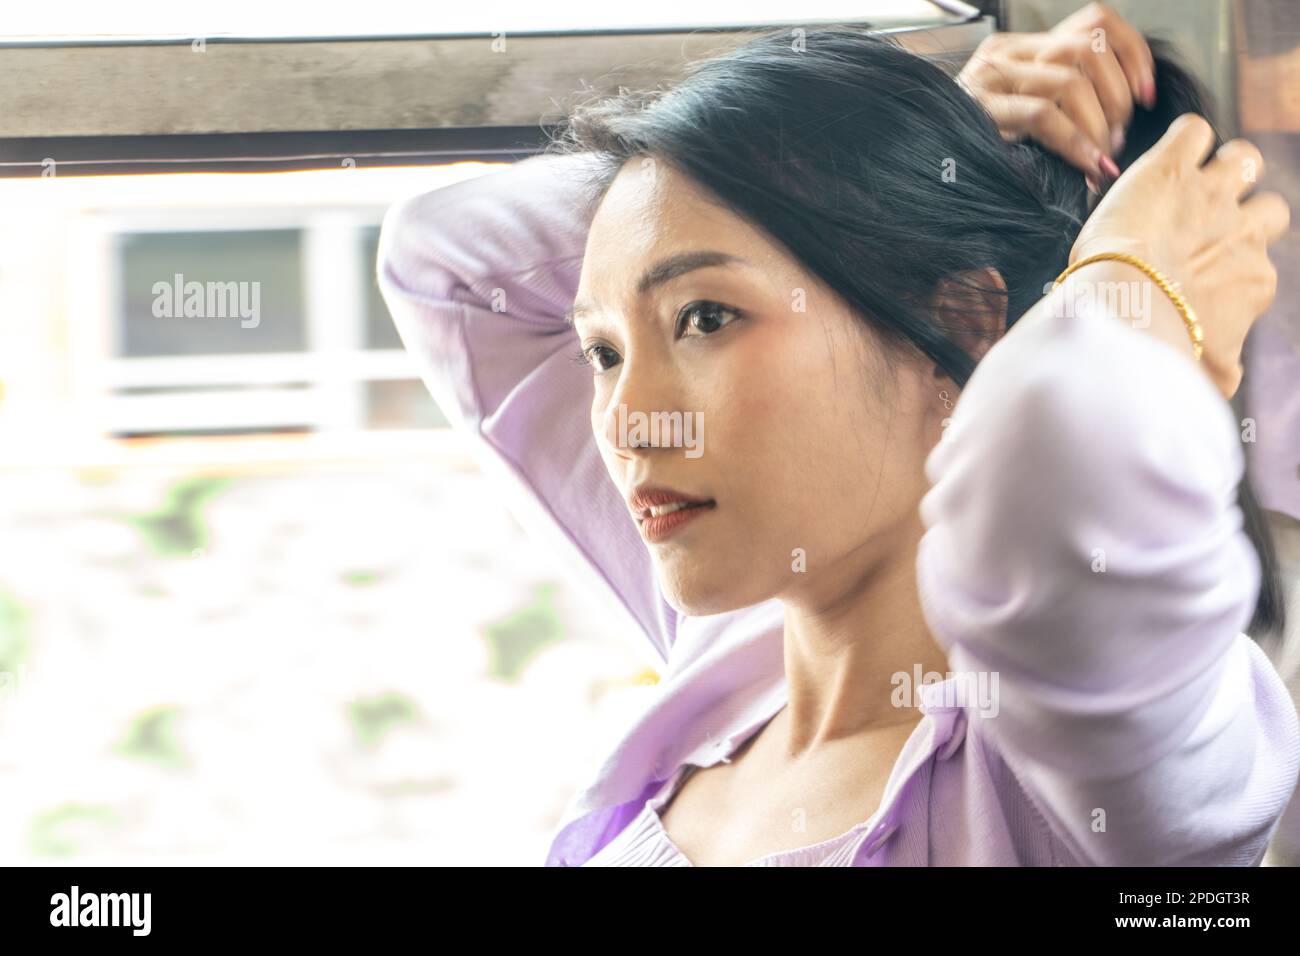 Portrait of a woman fixing her hair in a moving old bus Stock Photo